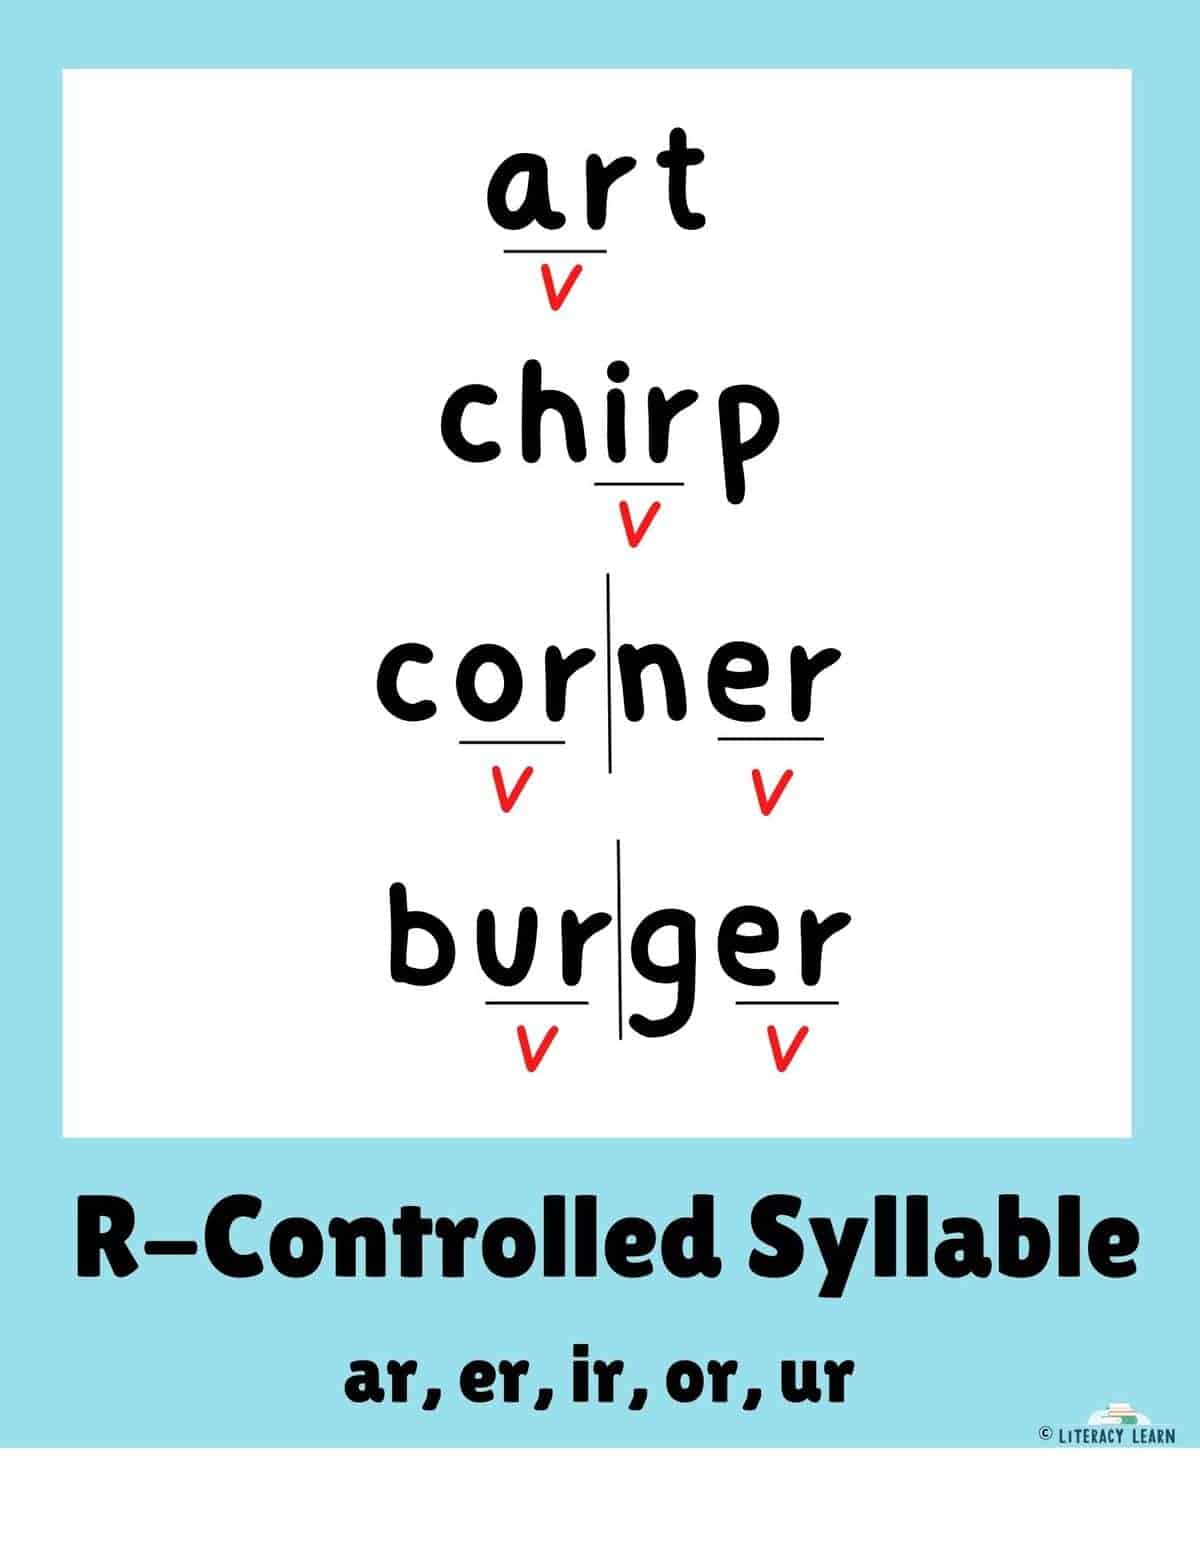 Visual showing R-controlled vowel syllable words divided into syllables: art, chirp, corner, and burger.